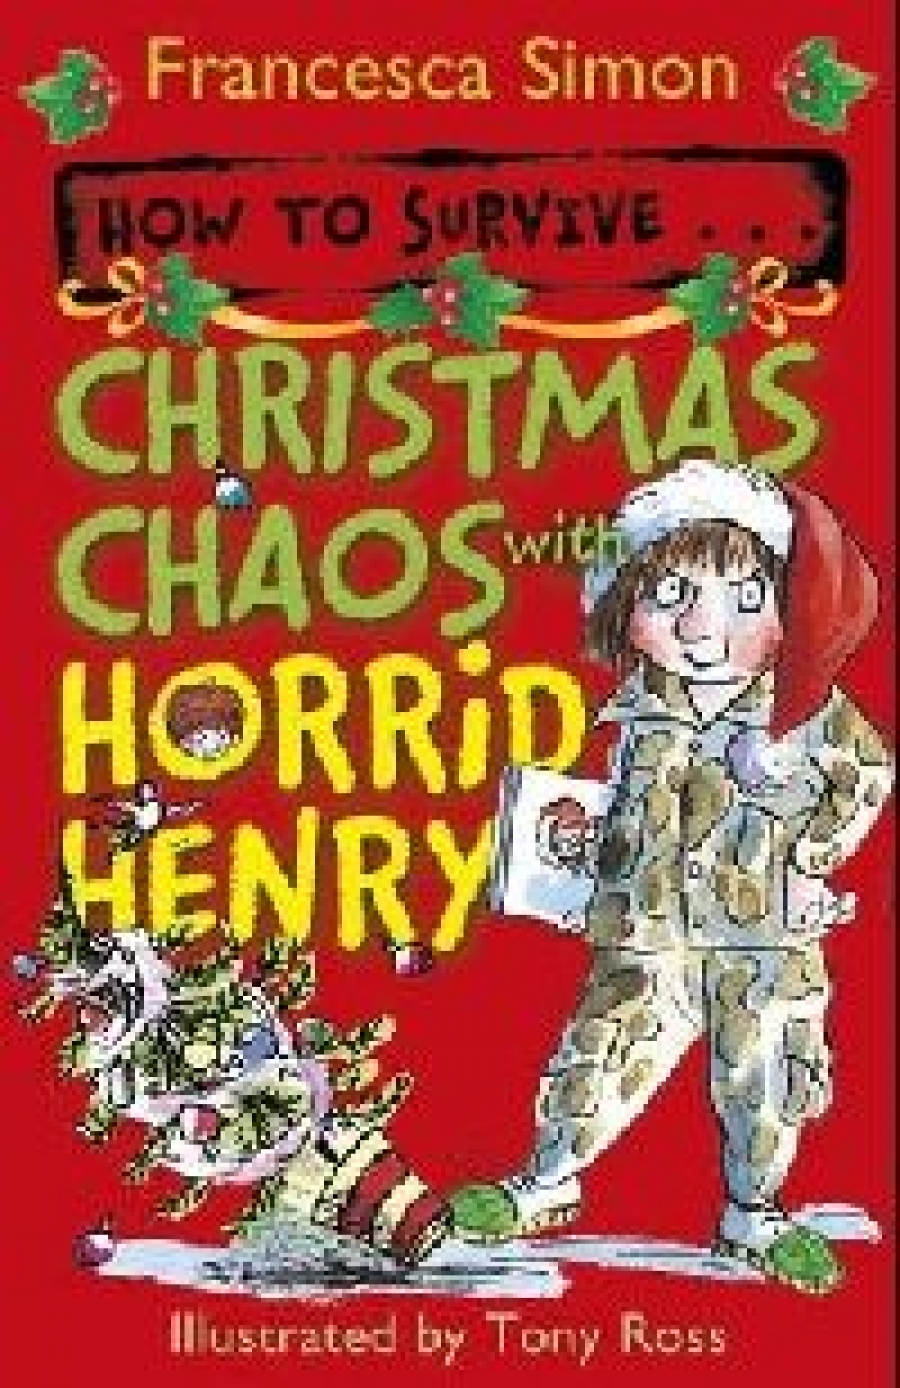 Francesca, Simon How to Survive . . . Christmas Chaos with Horrid Henry ( ...     ) 